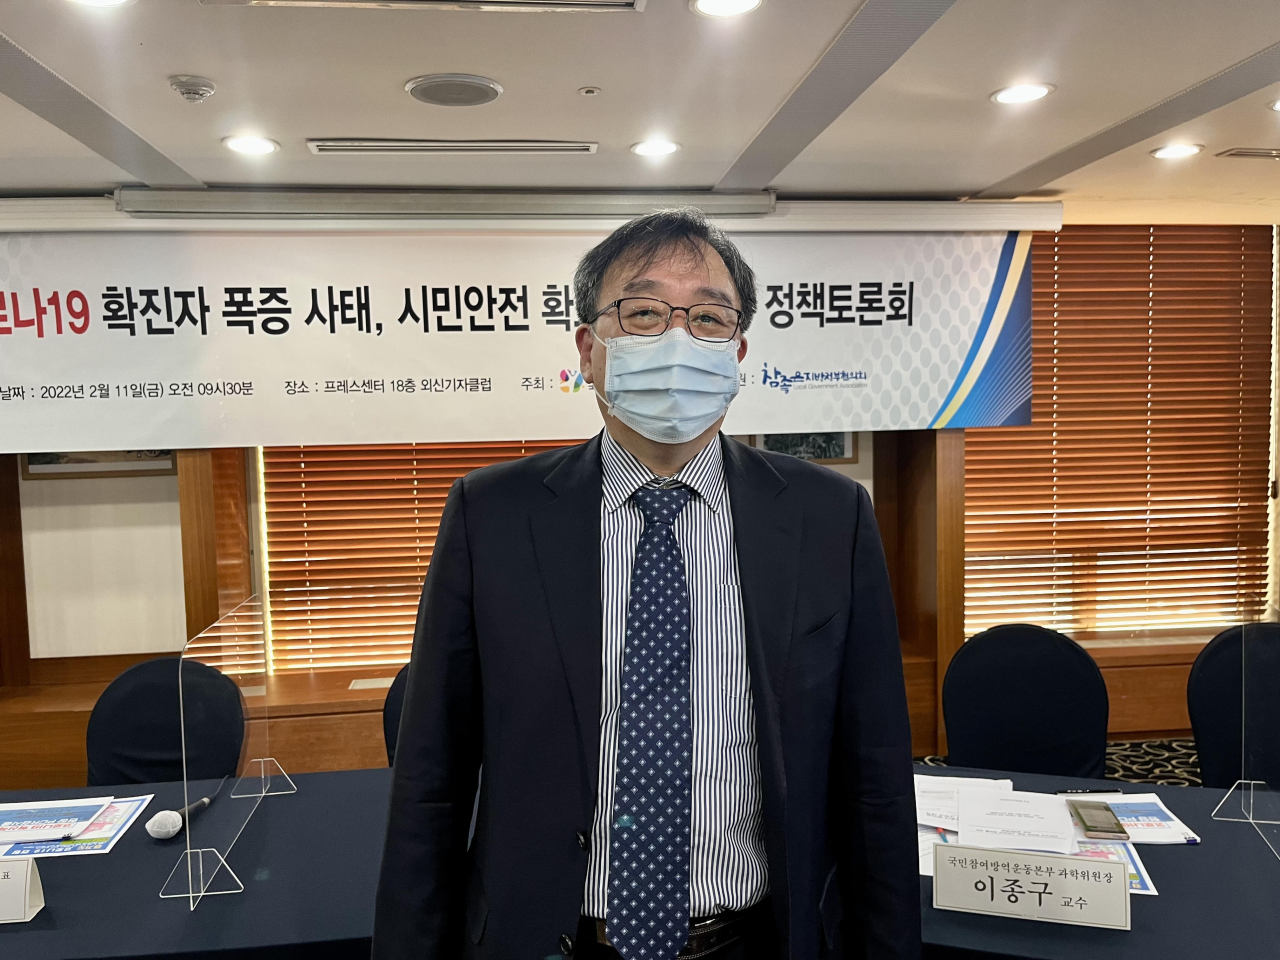 Dr. Lee Jong-koo poses for photo during a conference at the Korea Press Foundation building in Jung-gu, central Seoul, on Friday. (Kim Arin/The Korea Herald)